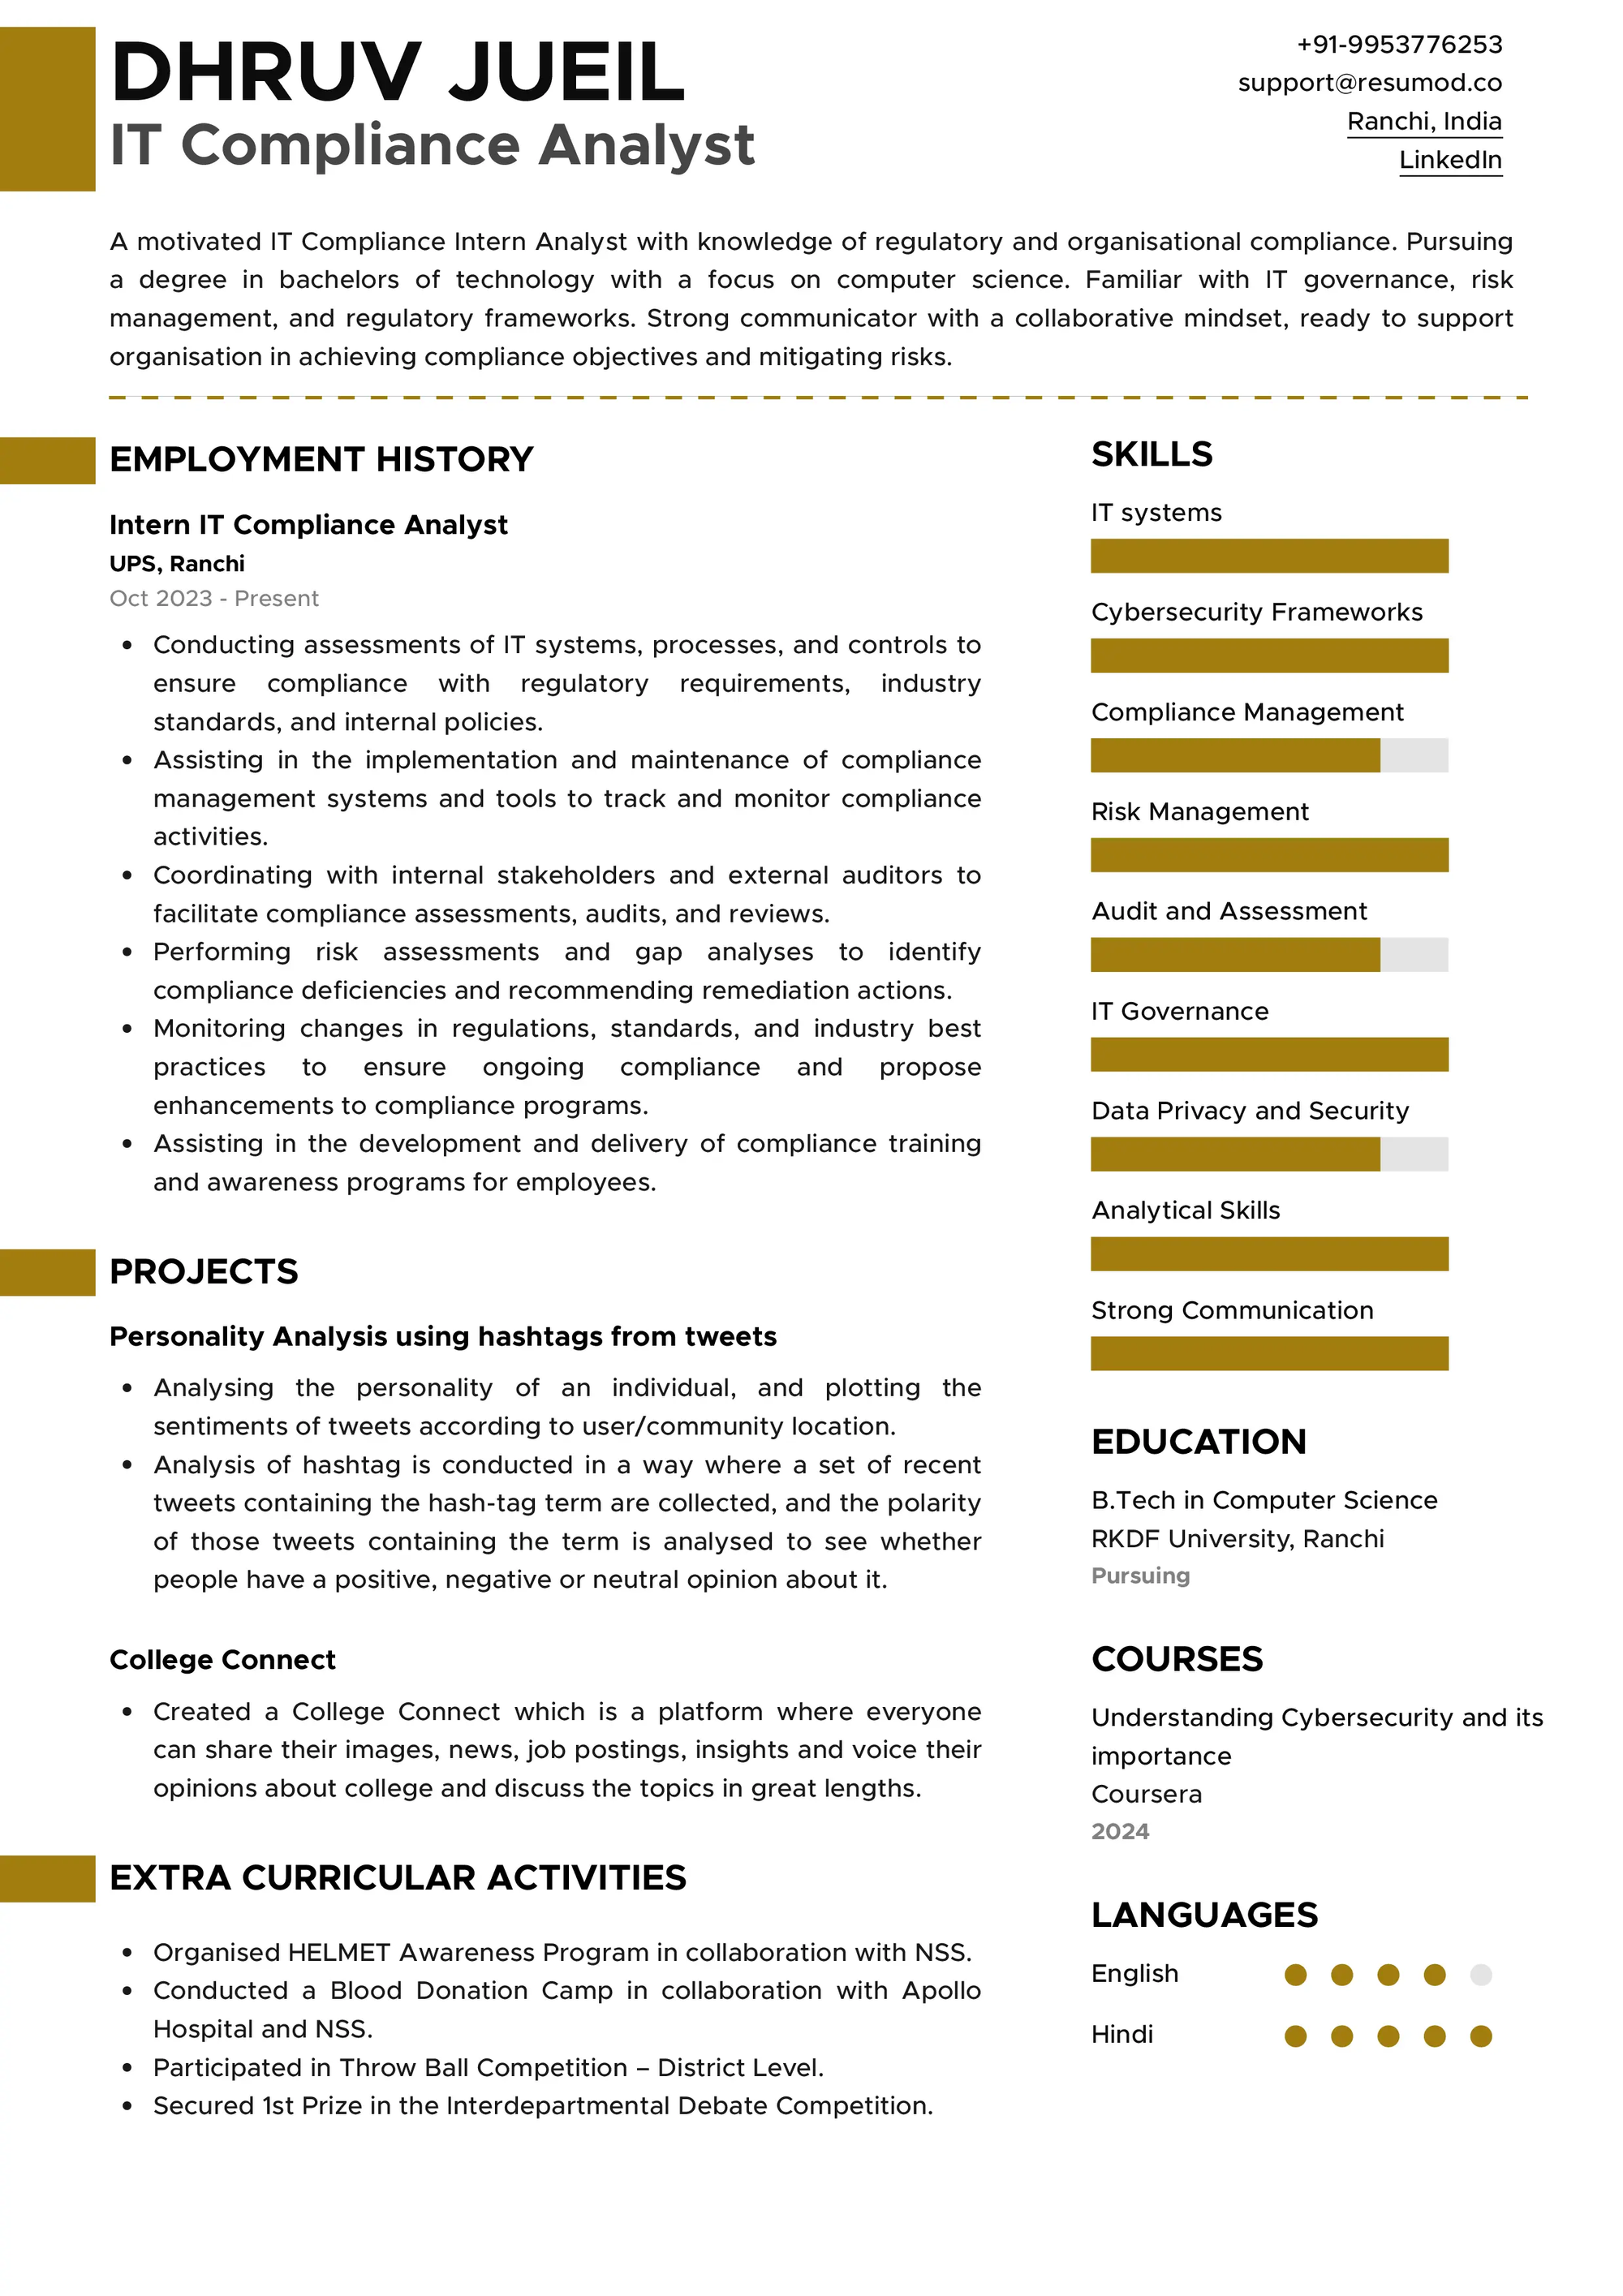 Resume of IT Compliance Analyst built on Resumod